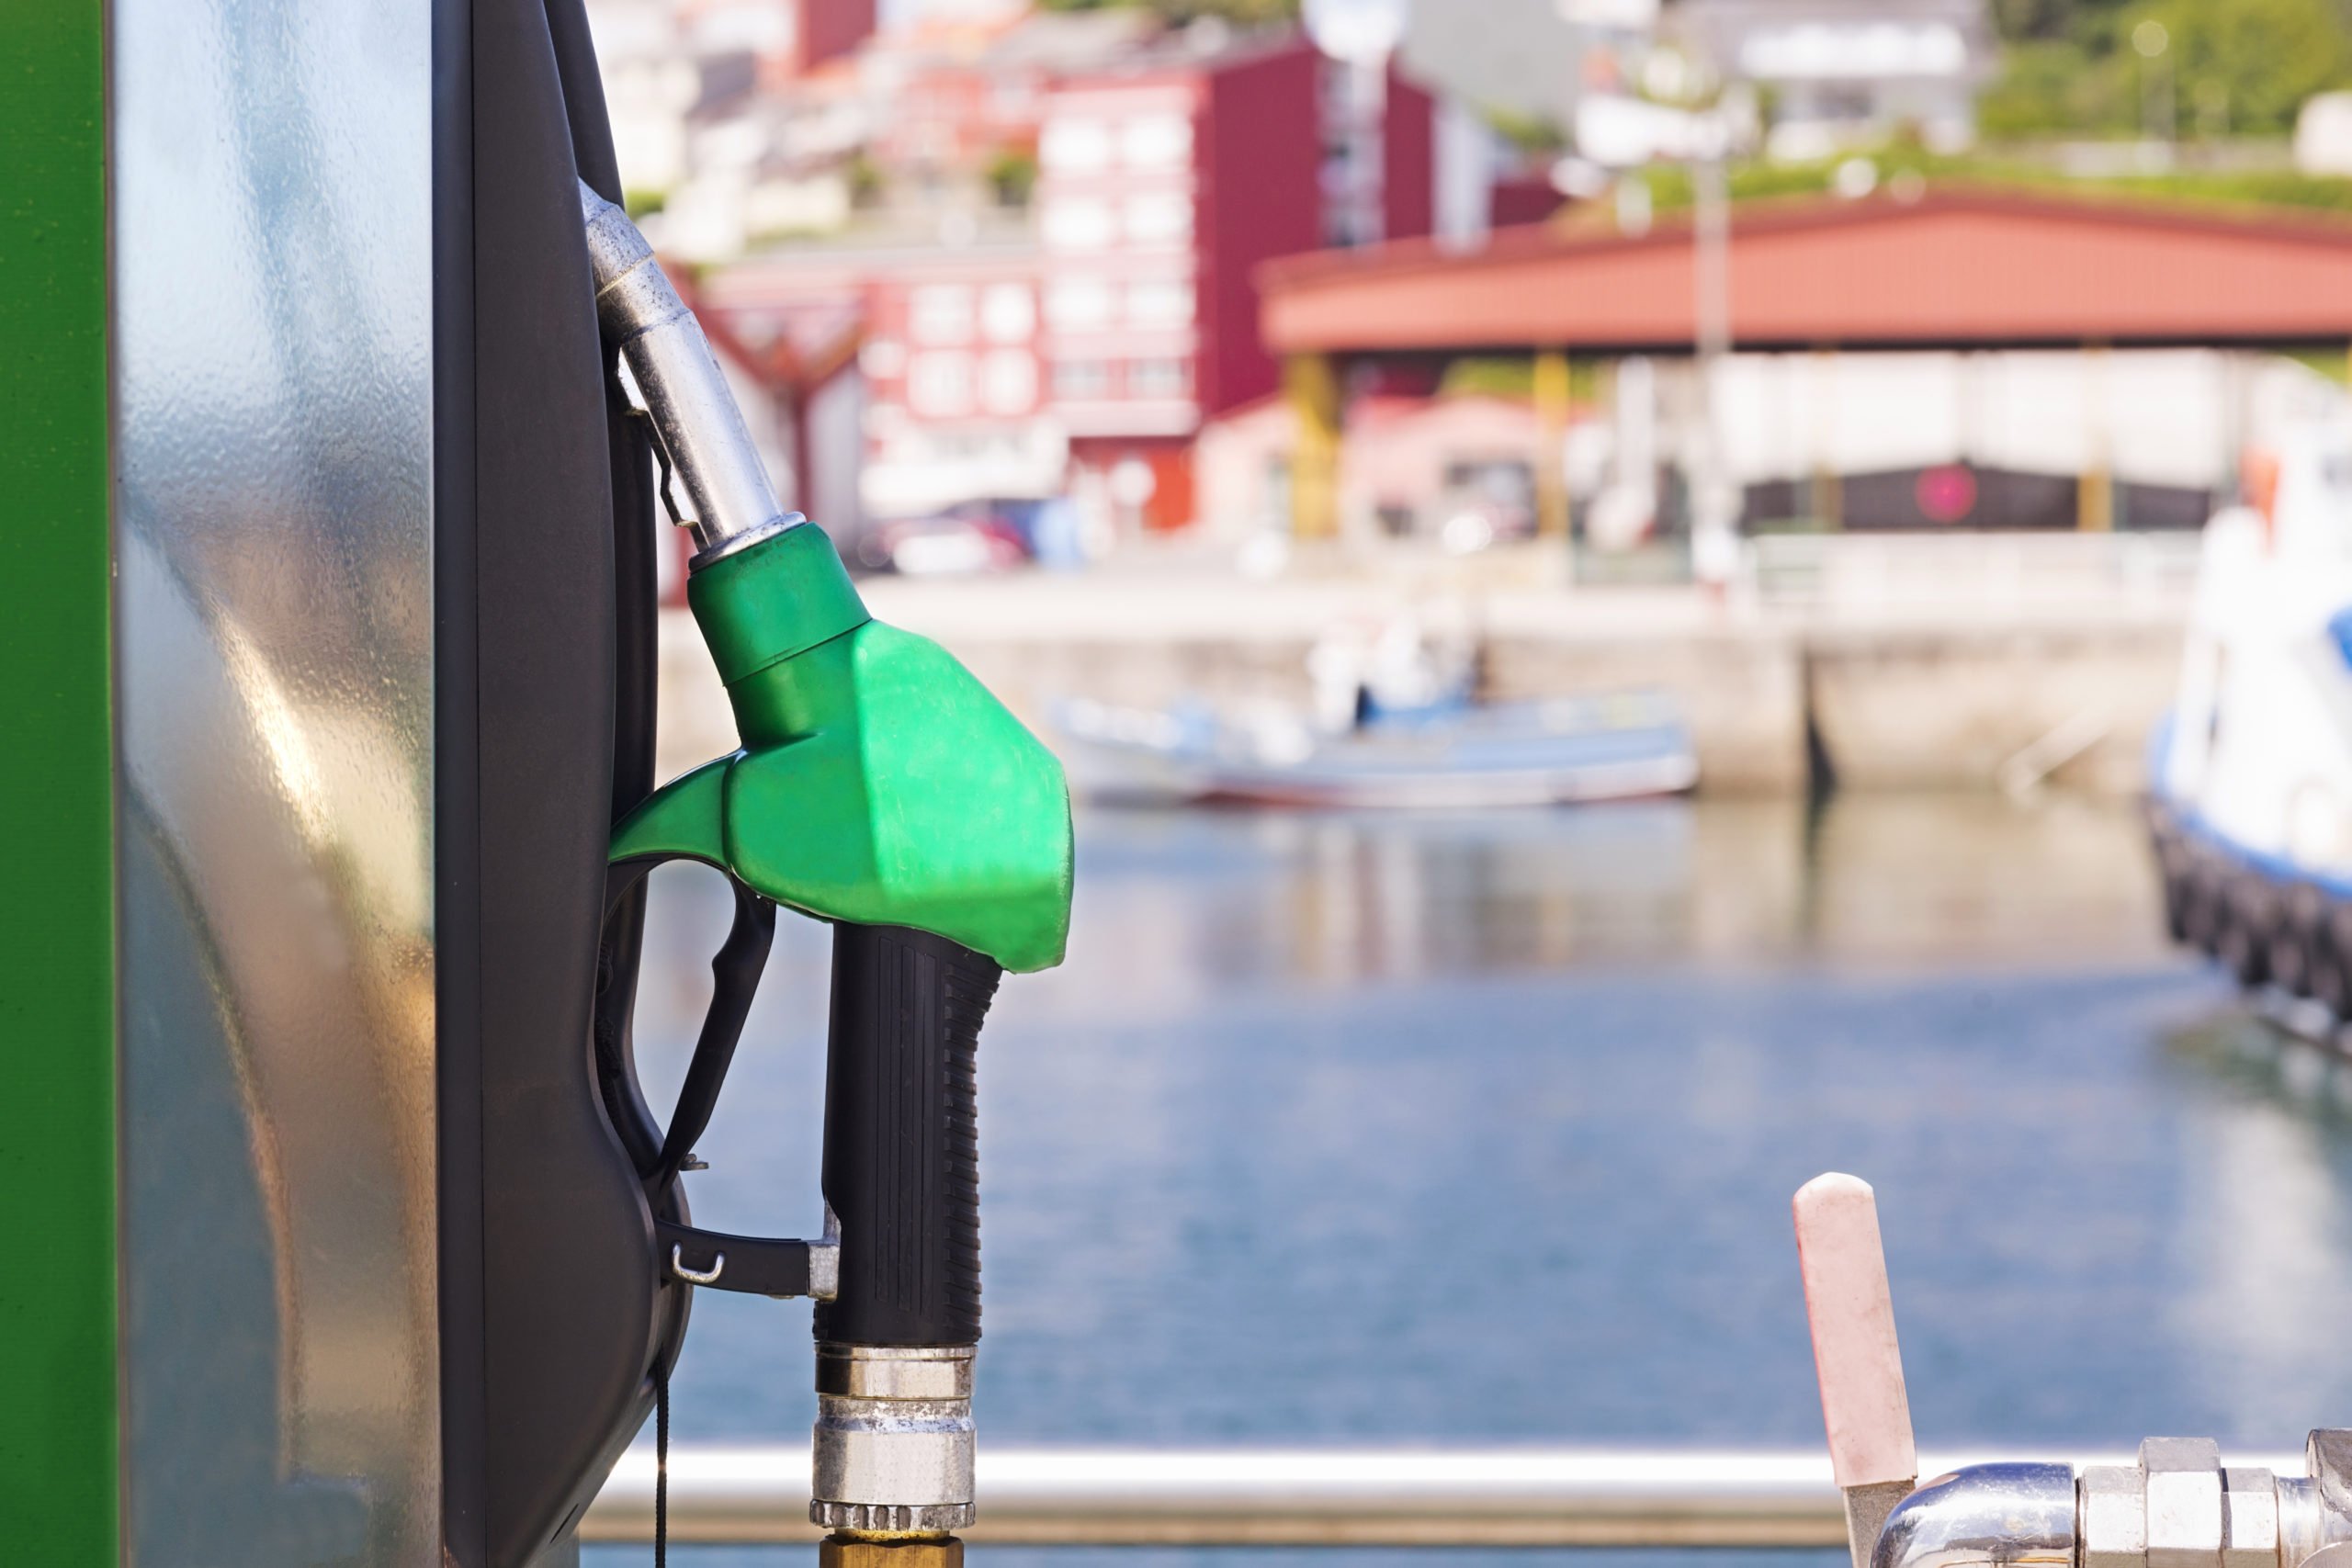 Boating 101: Safety Precautions for Fueling Your Boat - Woodard Marine